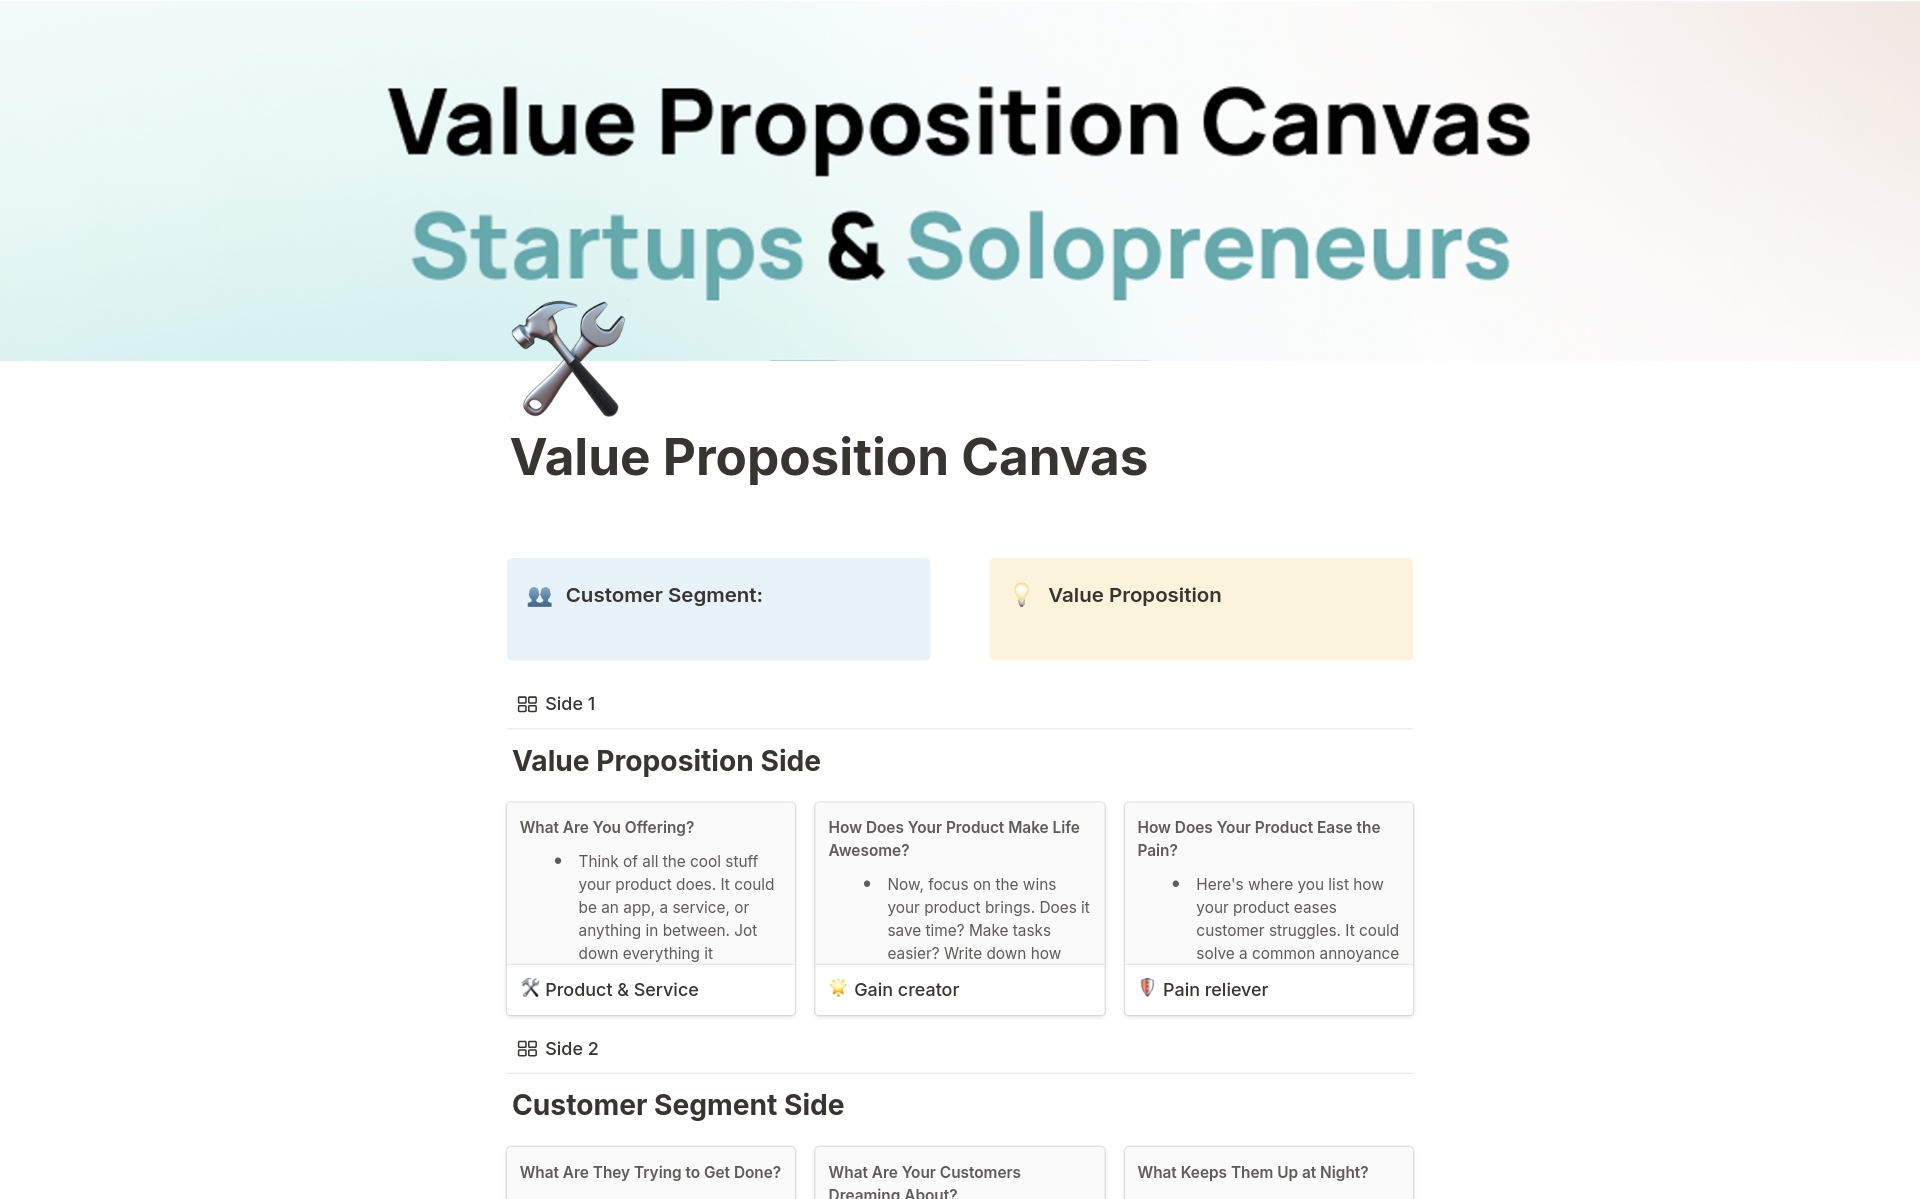 Value Proposition Canvas for Startups & Solo Prosのテンプレートのプレビュー